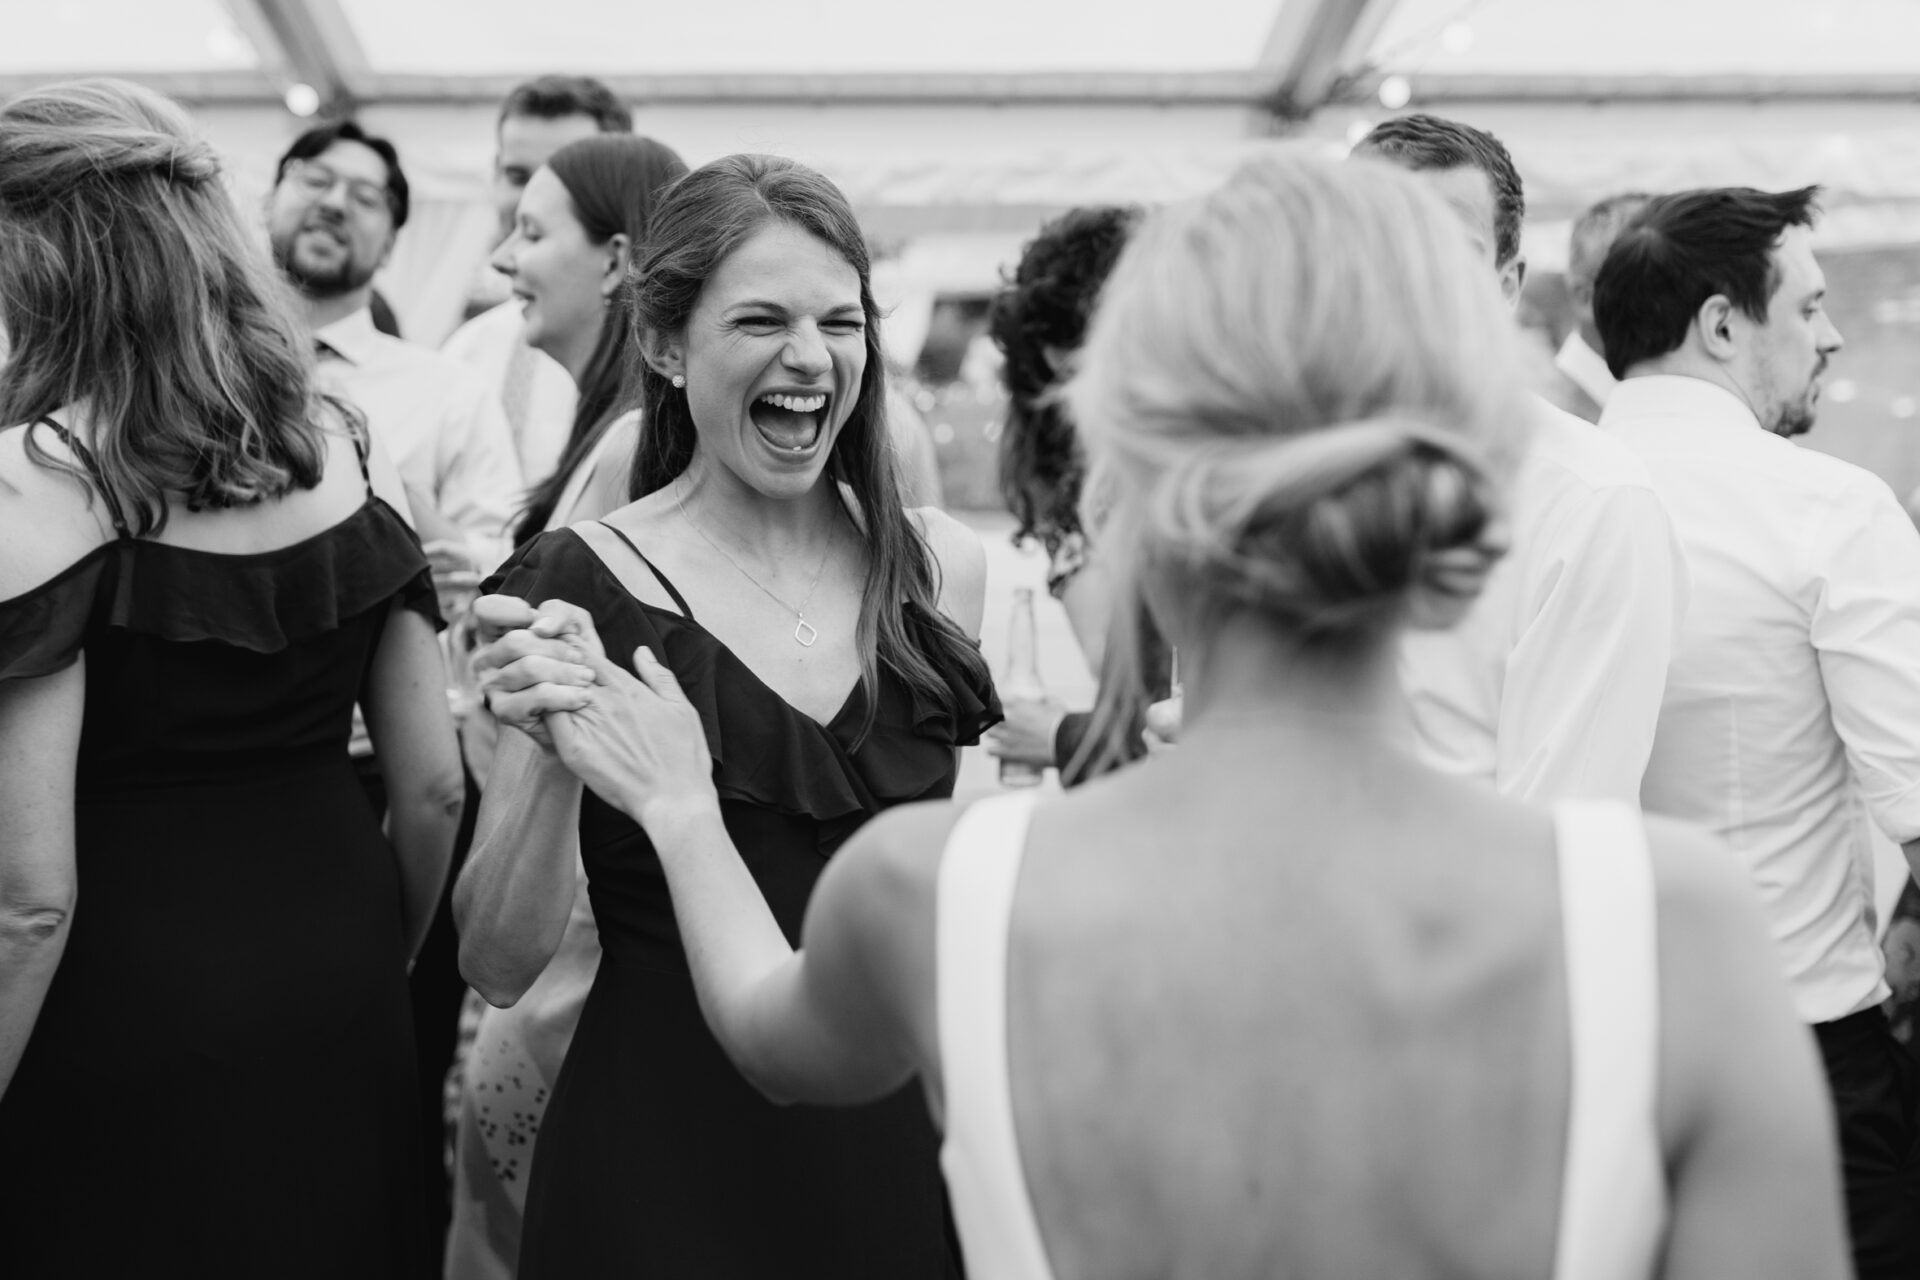 The bride dances with her bridesmaid